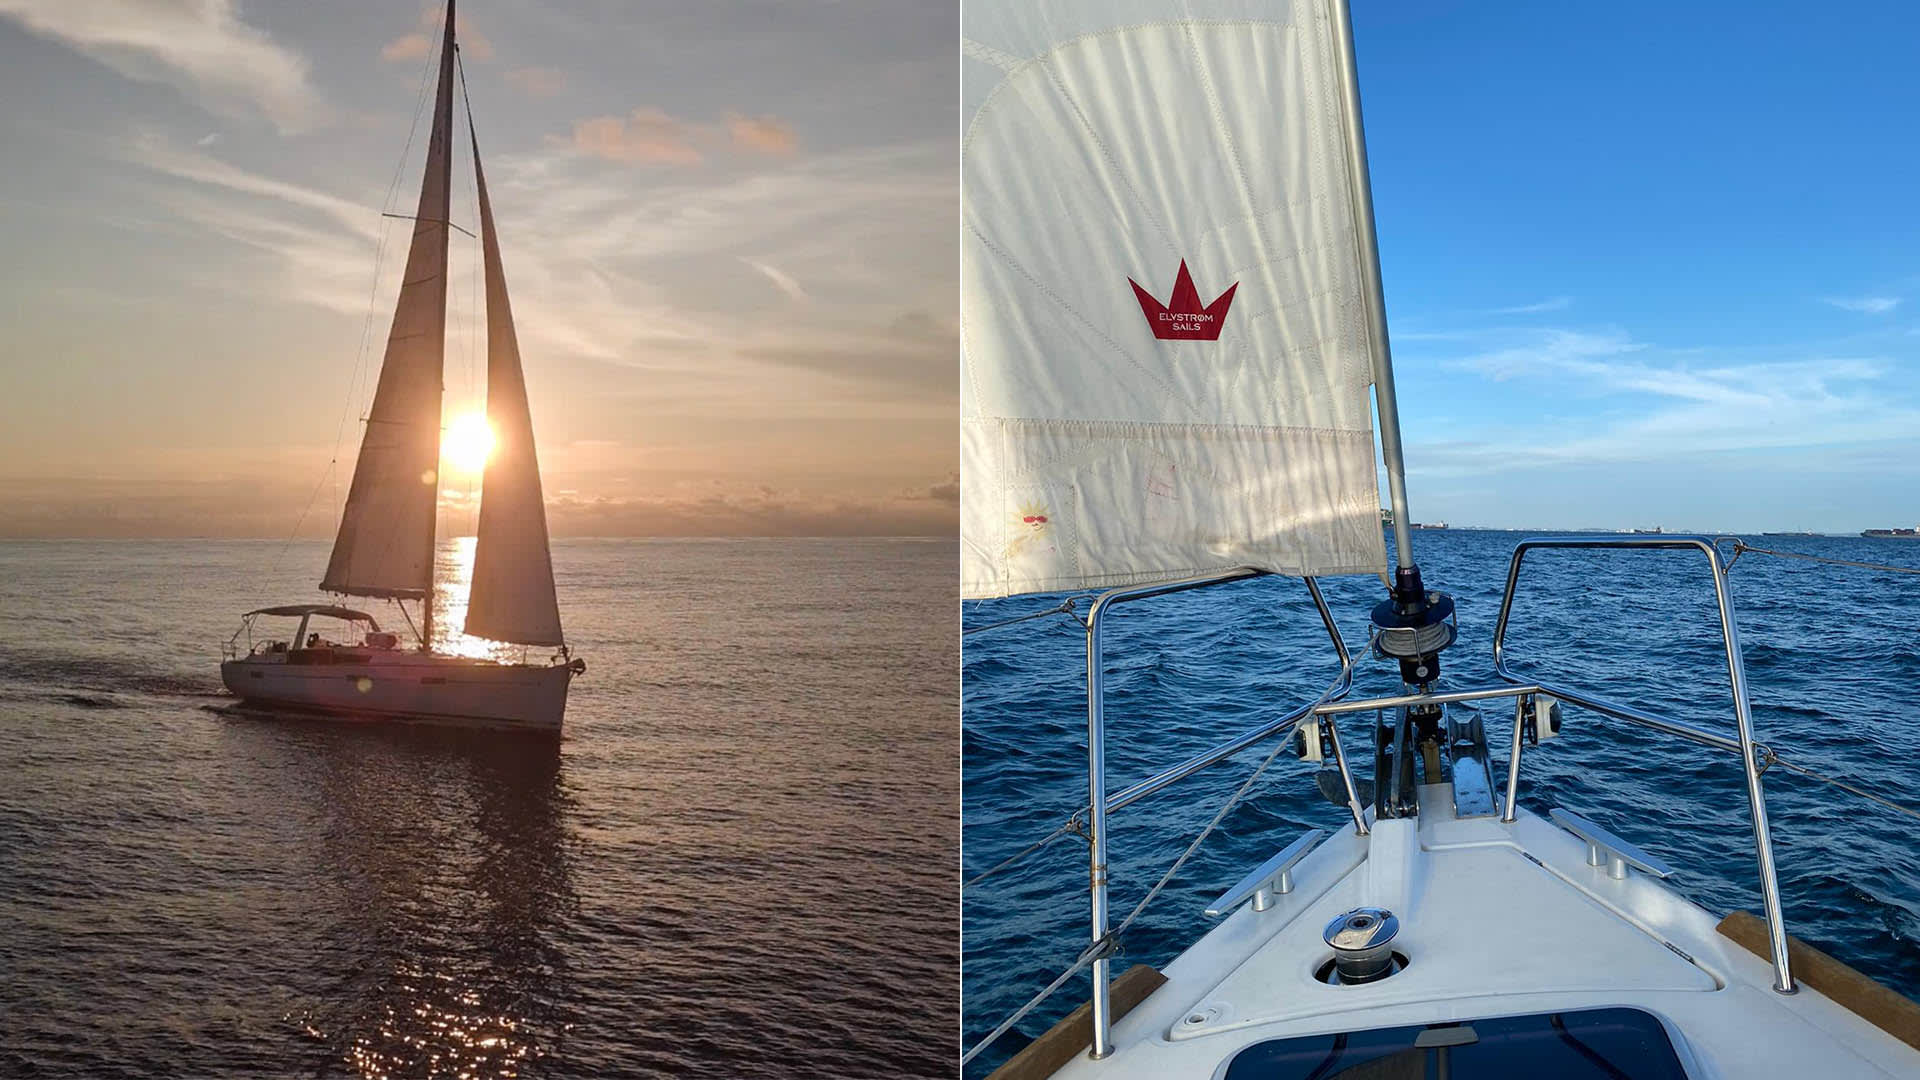 We Went On A Sailing Staycation On A Yacht To The Southern Islands Of Singapore. This Is What It’s Like